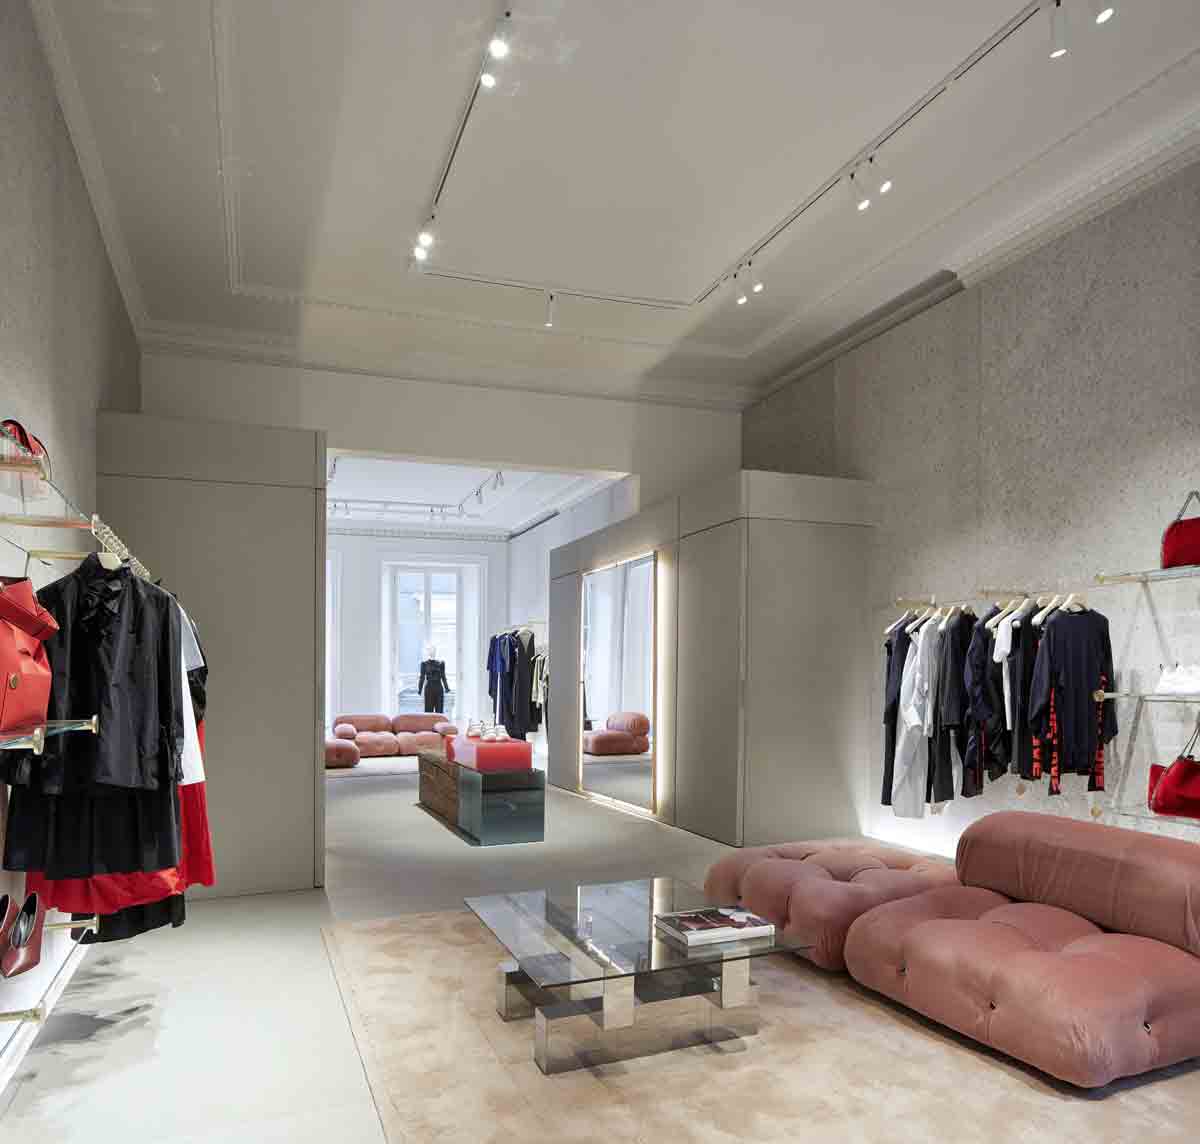 High Fashion Gets A Green Makeover In Stella McCartney's New Flagship ...